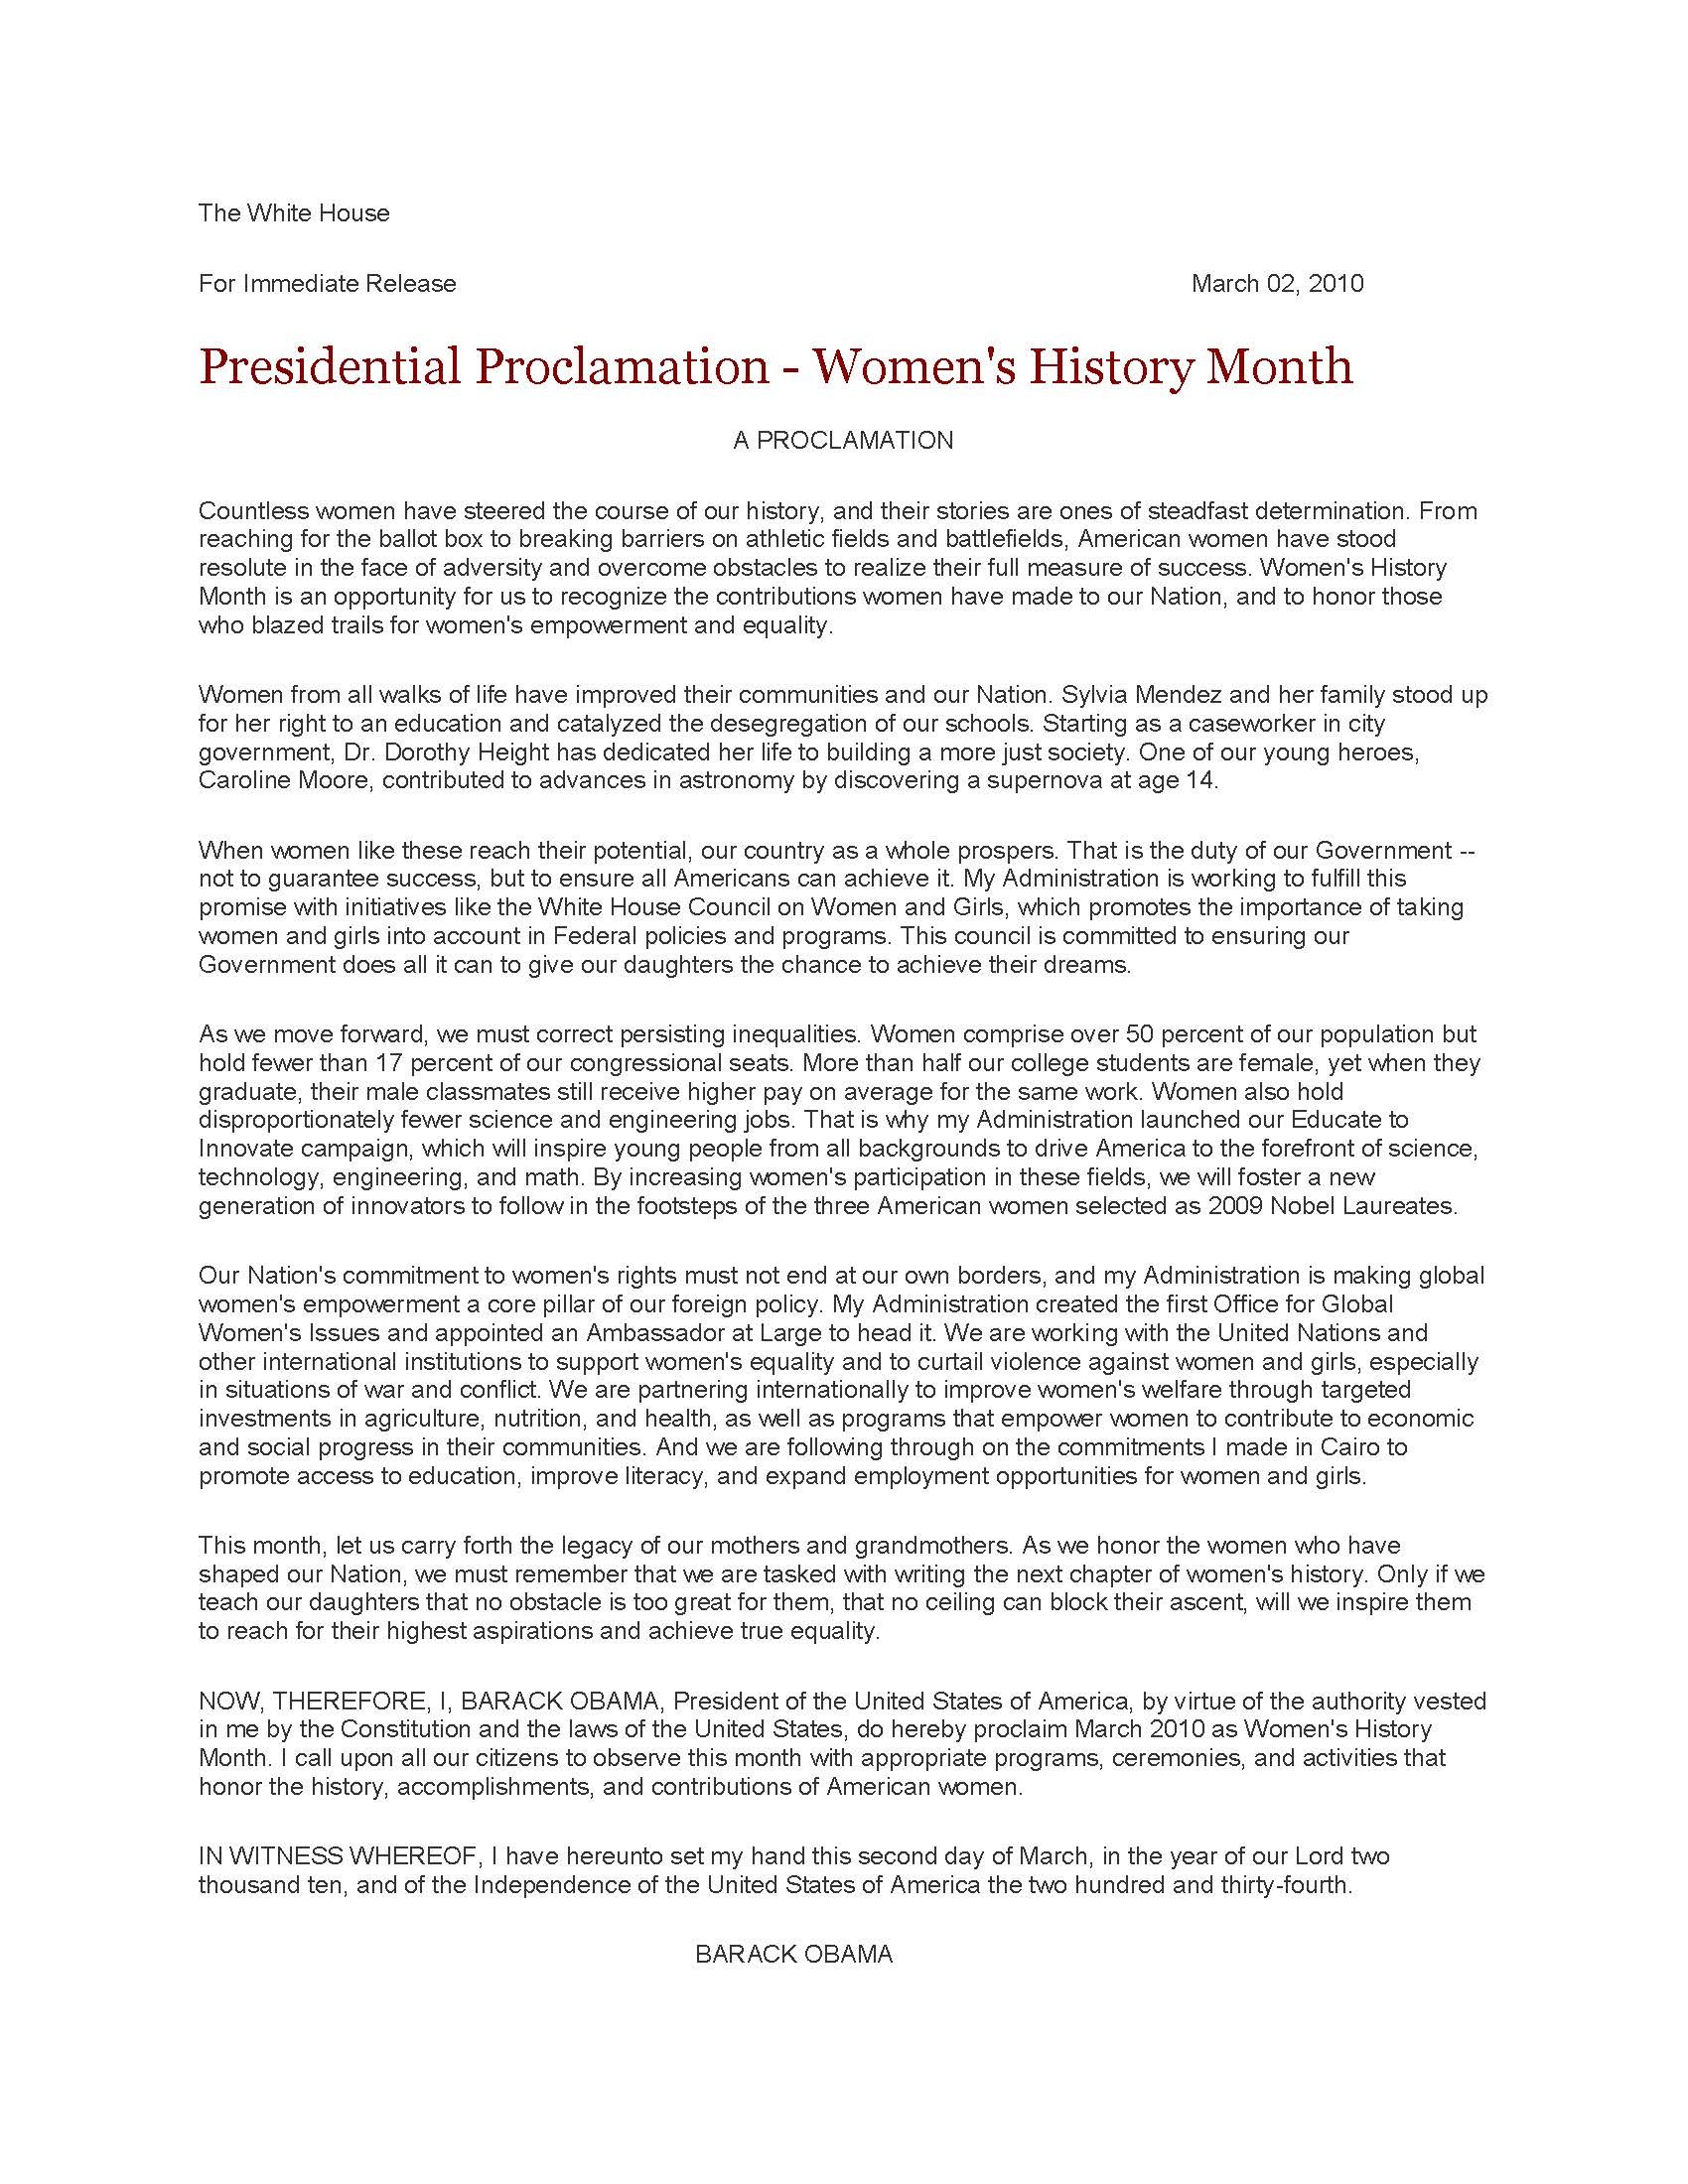 Presidential Proclamation Women's History Month Article The